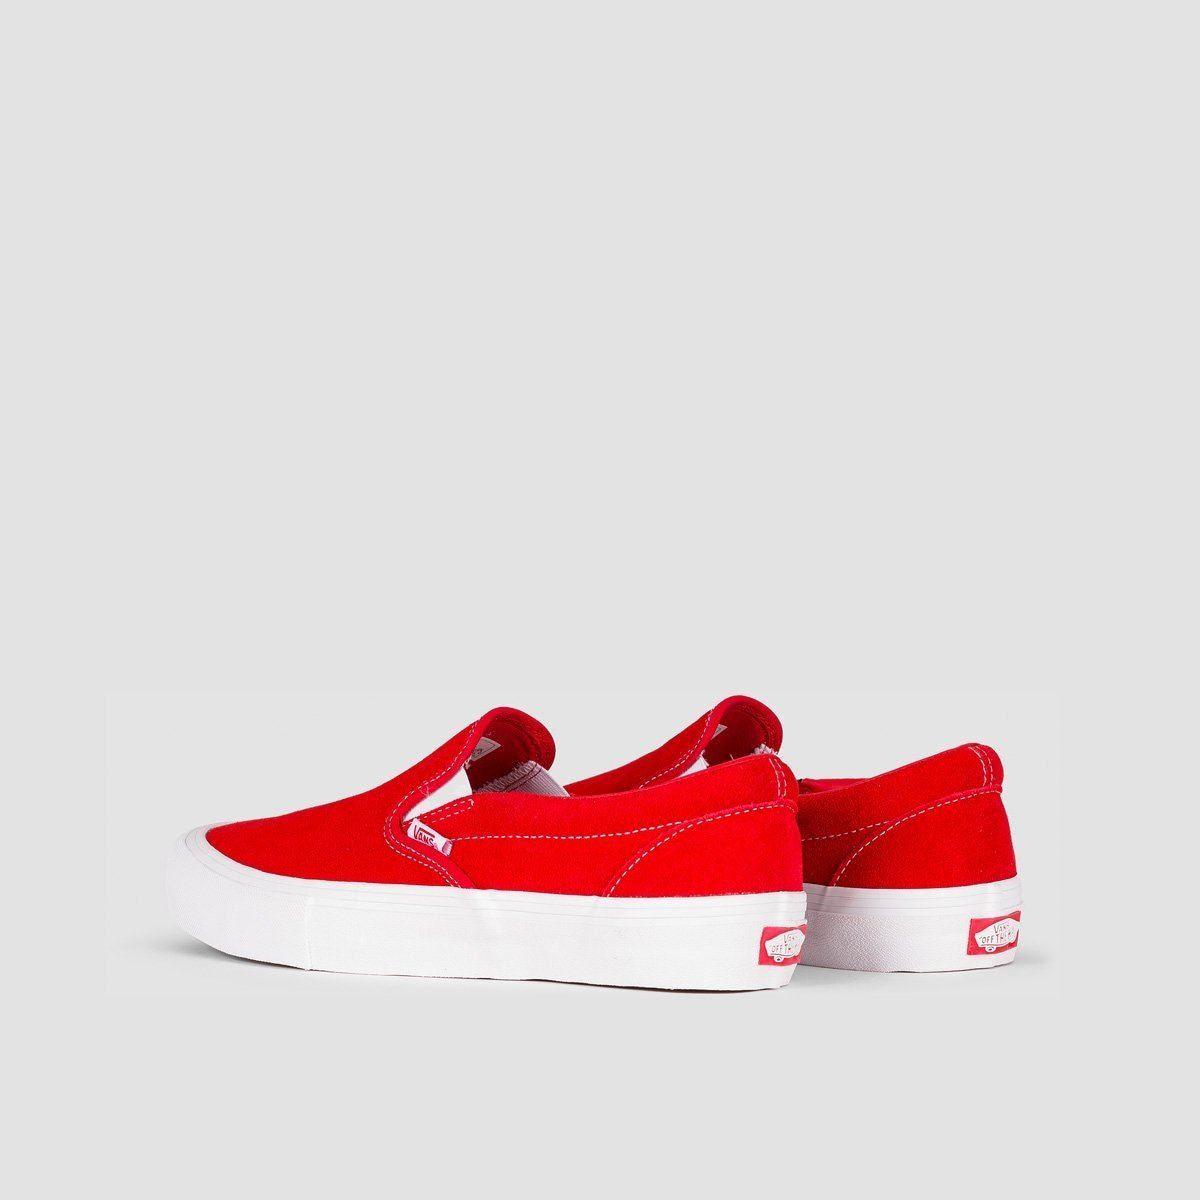 Vans Slip-On Pro Shoes - Suede Red/White